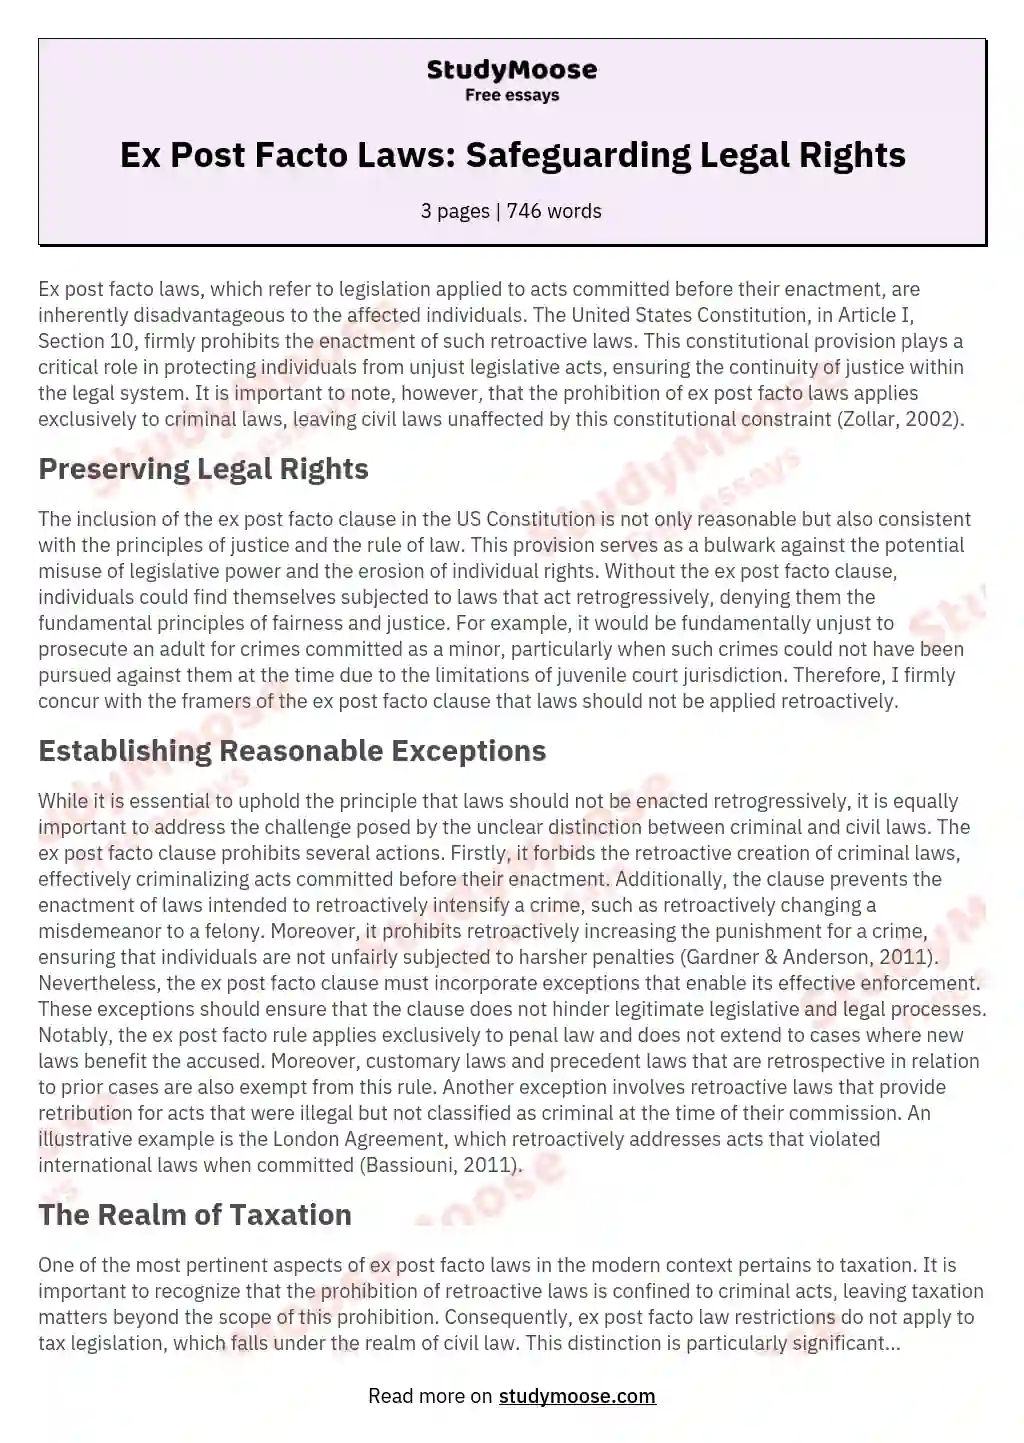 Ex Post Facto Laws: Safeguarding Legal Rights essay